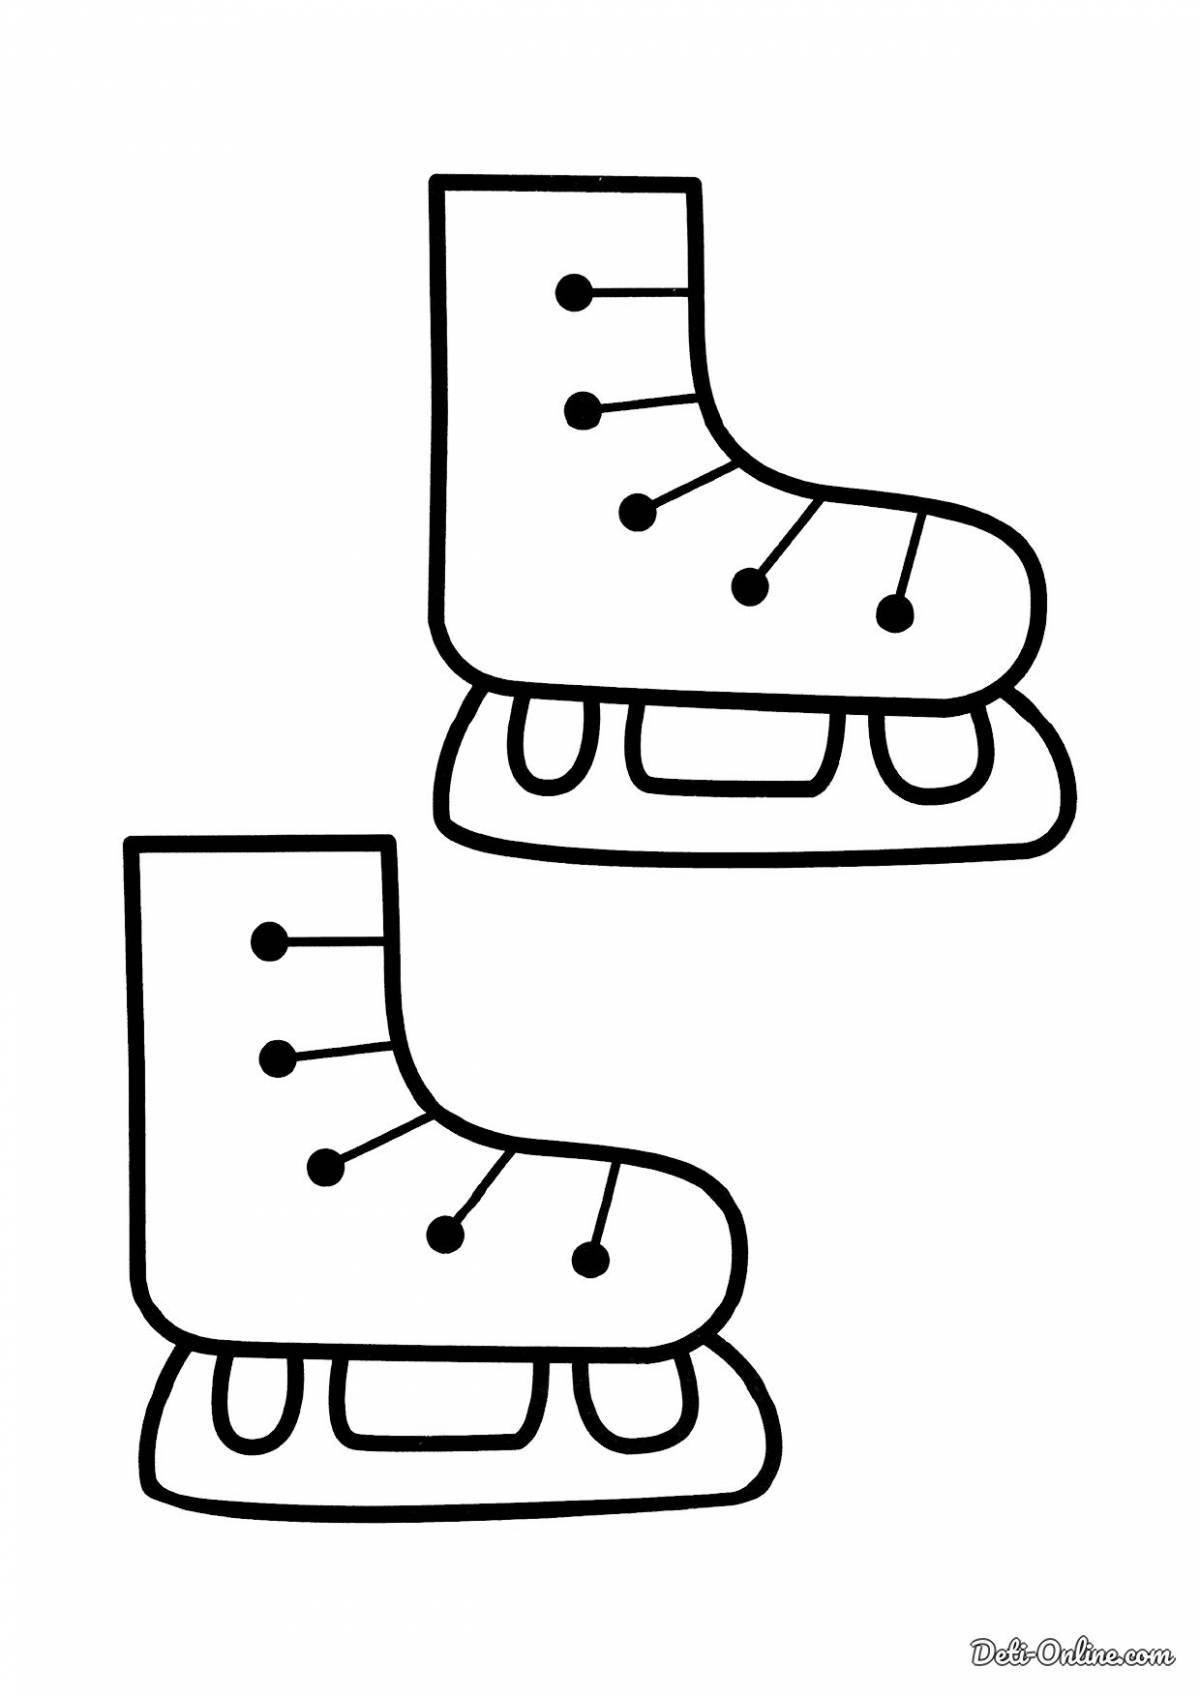 Shiny skates coloring book for children 5-6 years old